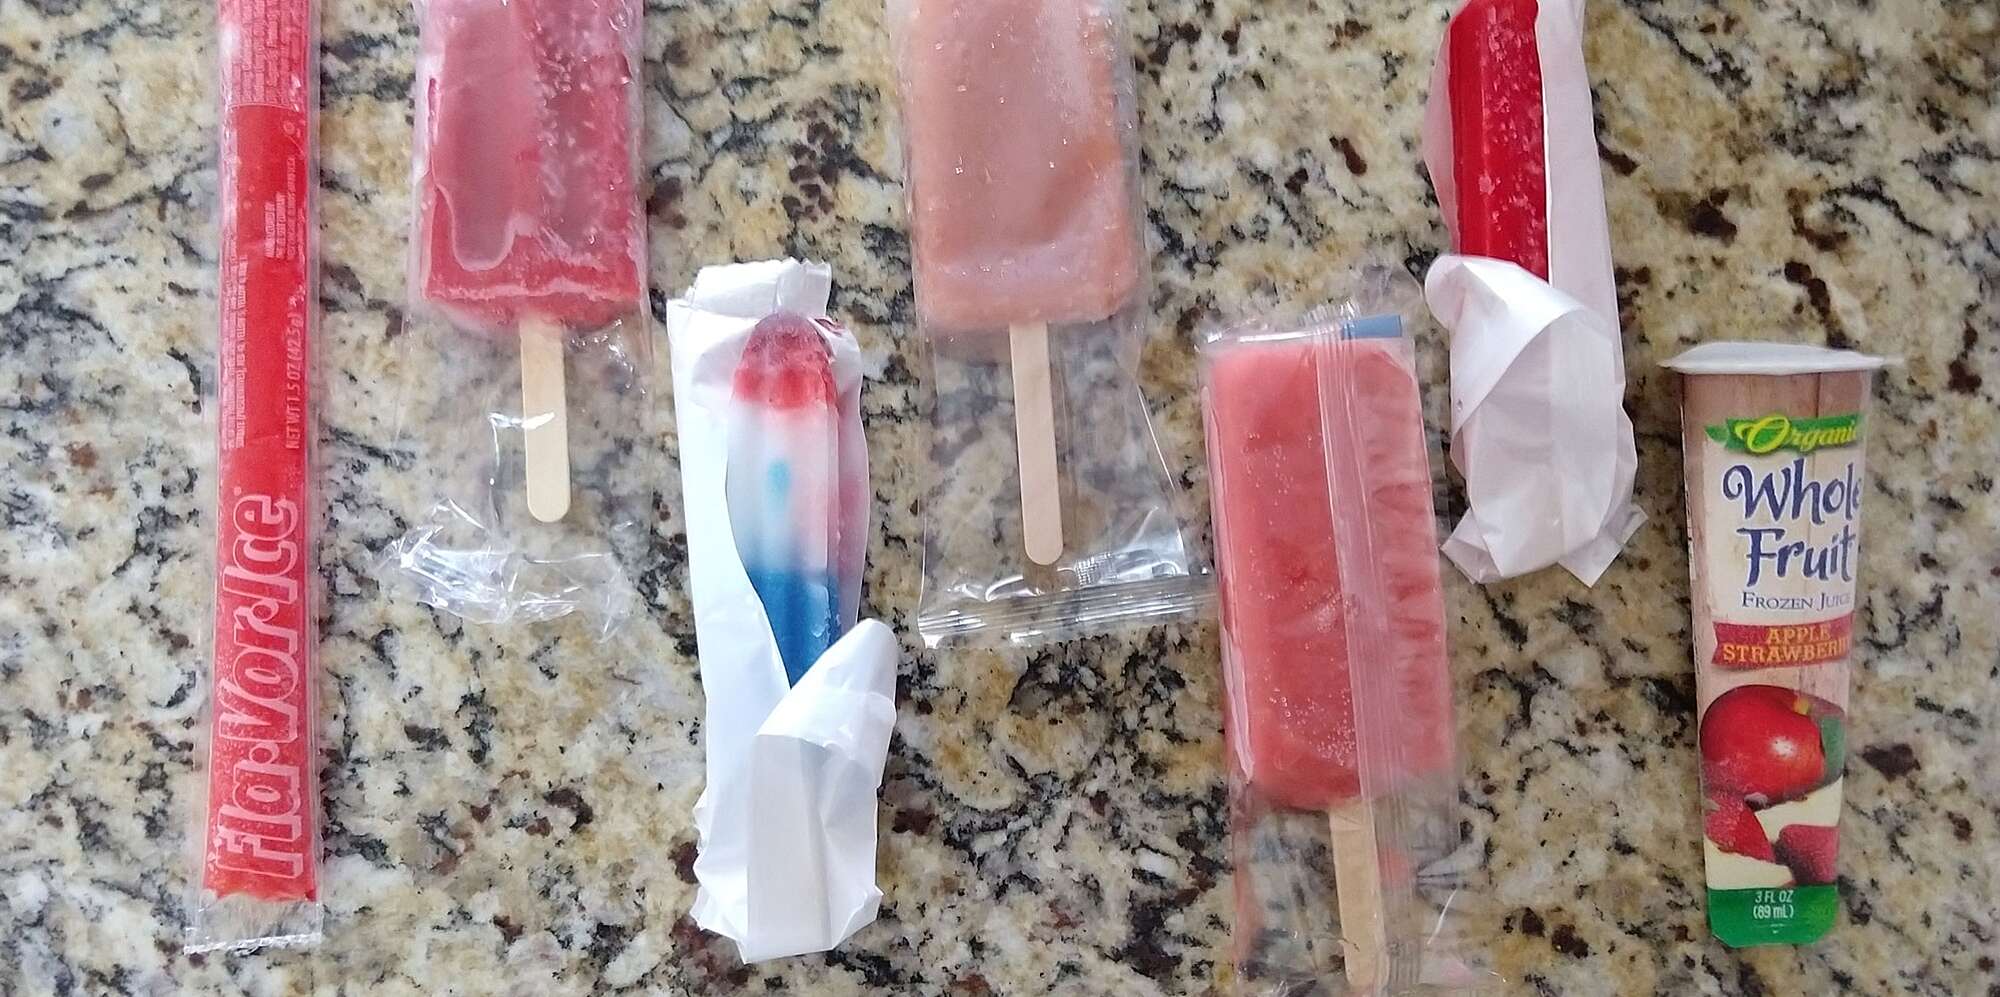 Wereldwijd Rauw streep I Tried 7 Popsicles, and This Is the Best One | MyRecipes